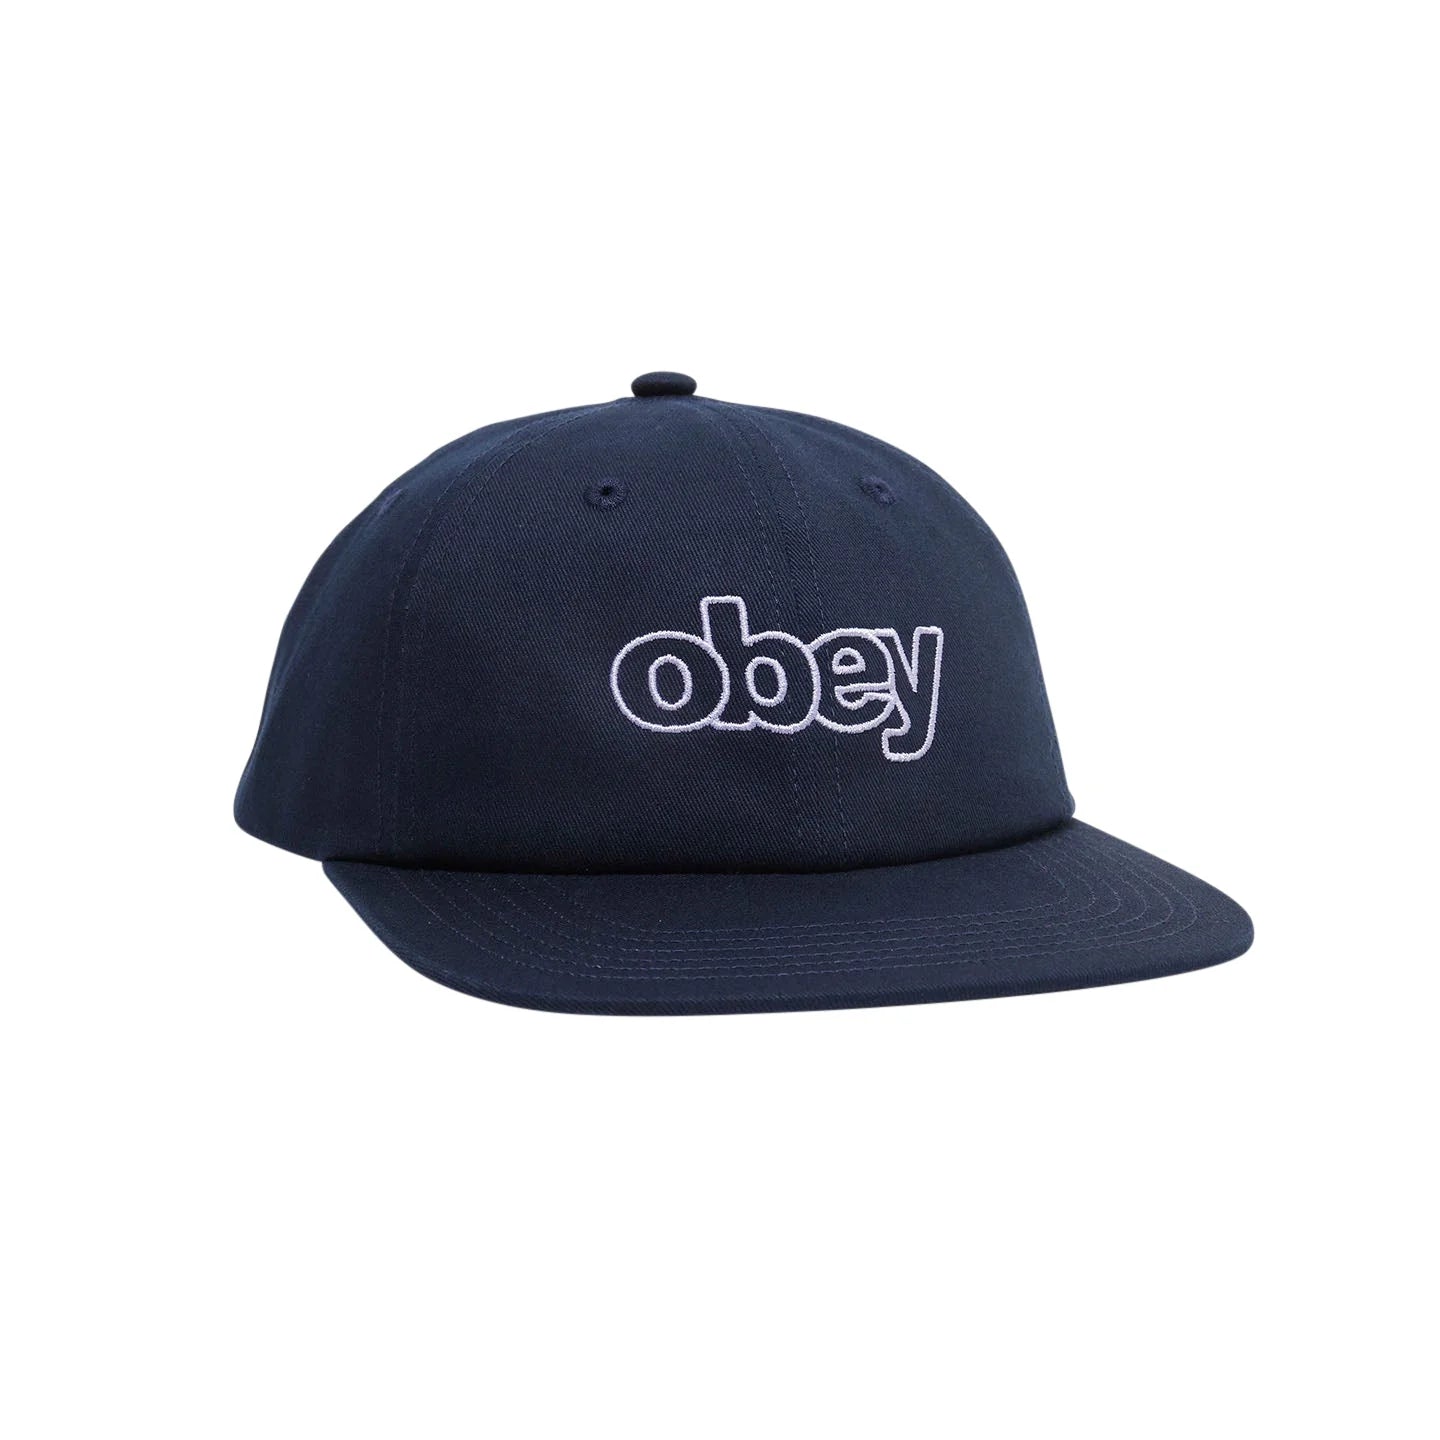 Obey Select 6 Panel Classic Snapback (Navy)